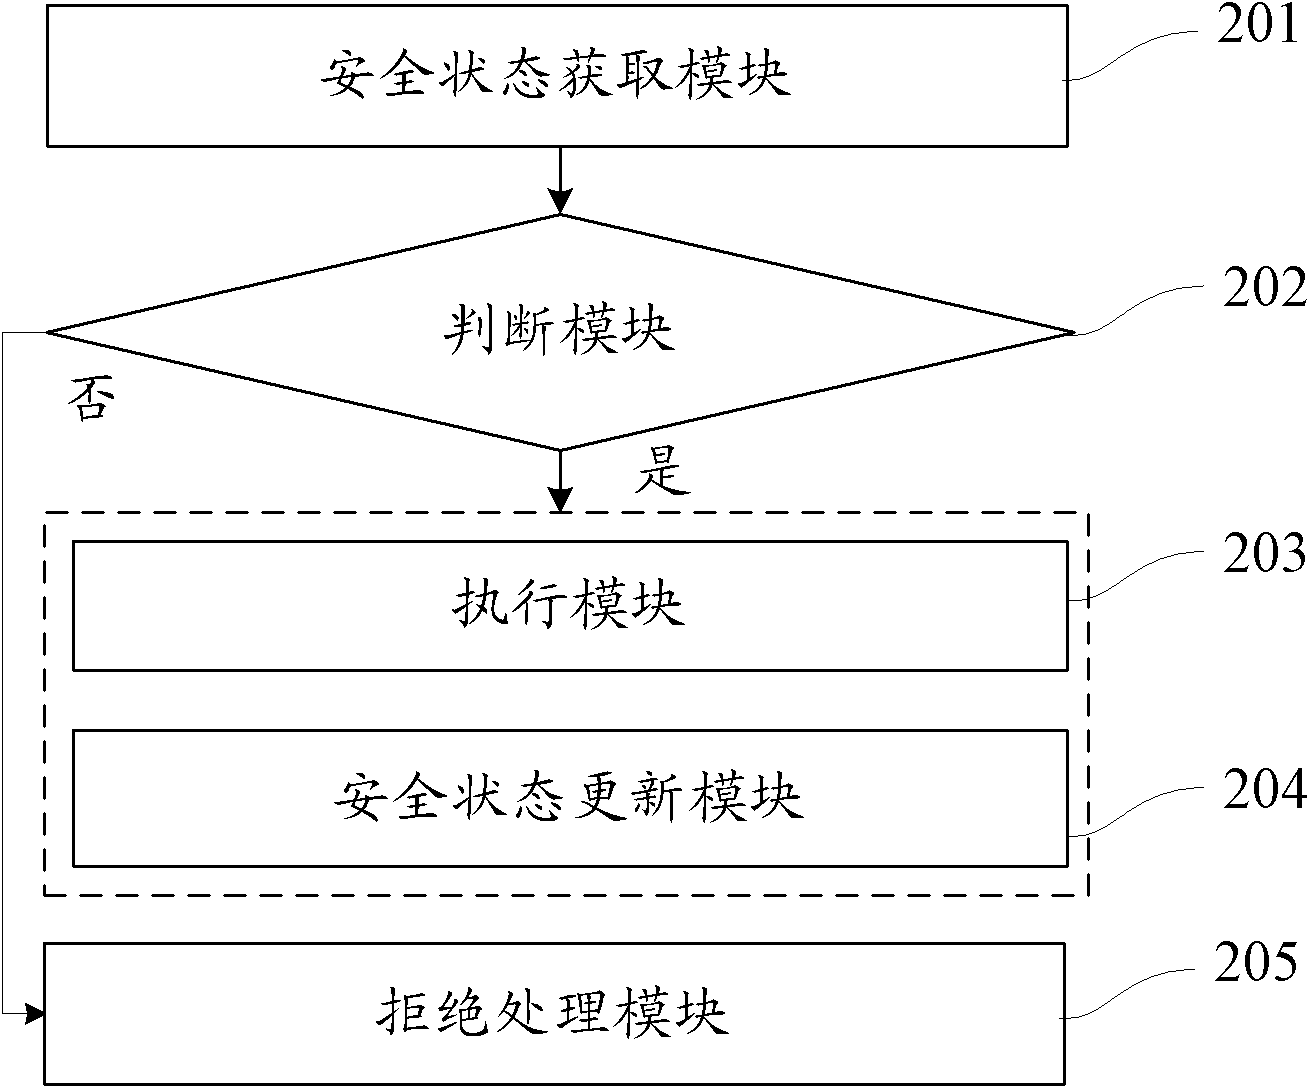 Method for checking operating authority of smart card and smart card